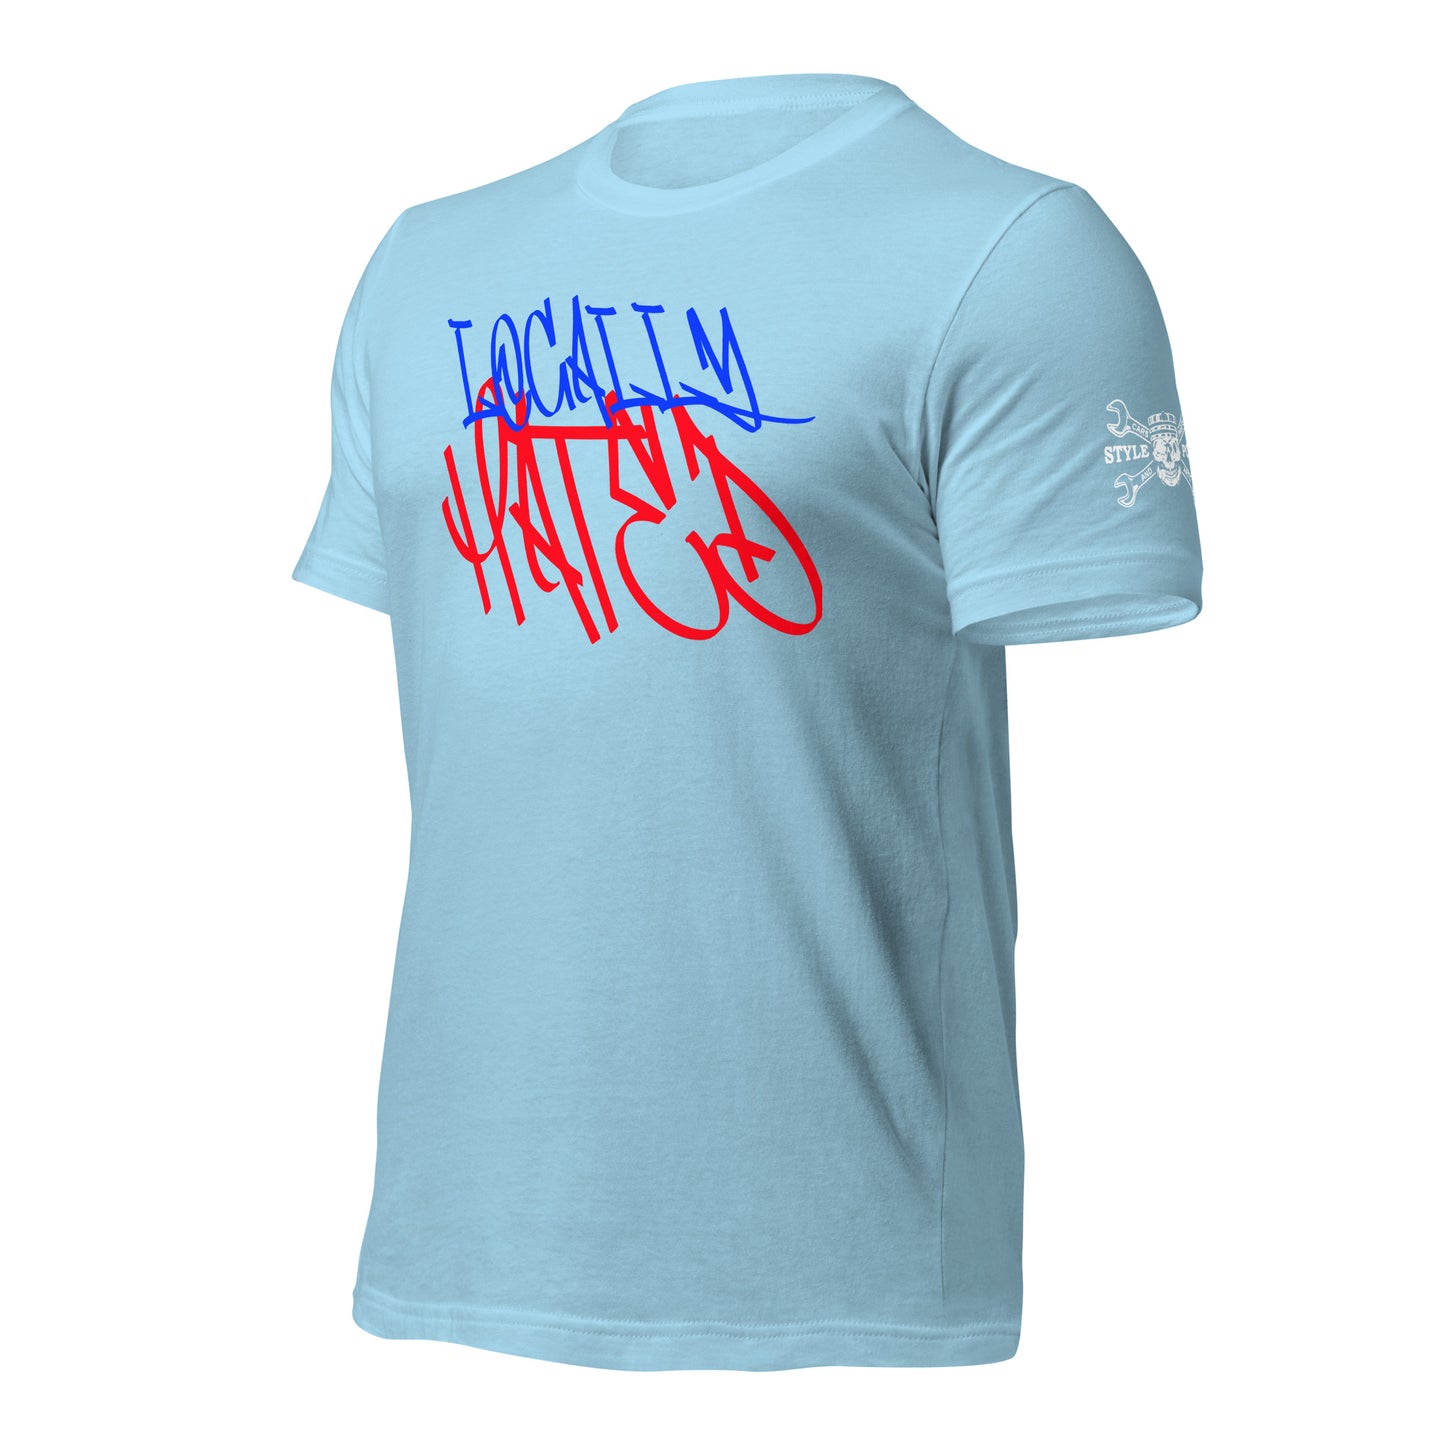 Stylepoint Locally Hated T Shirt